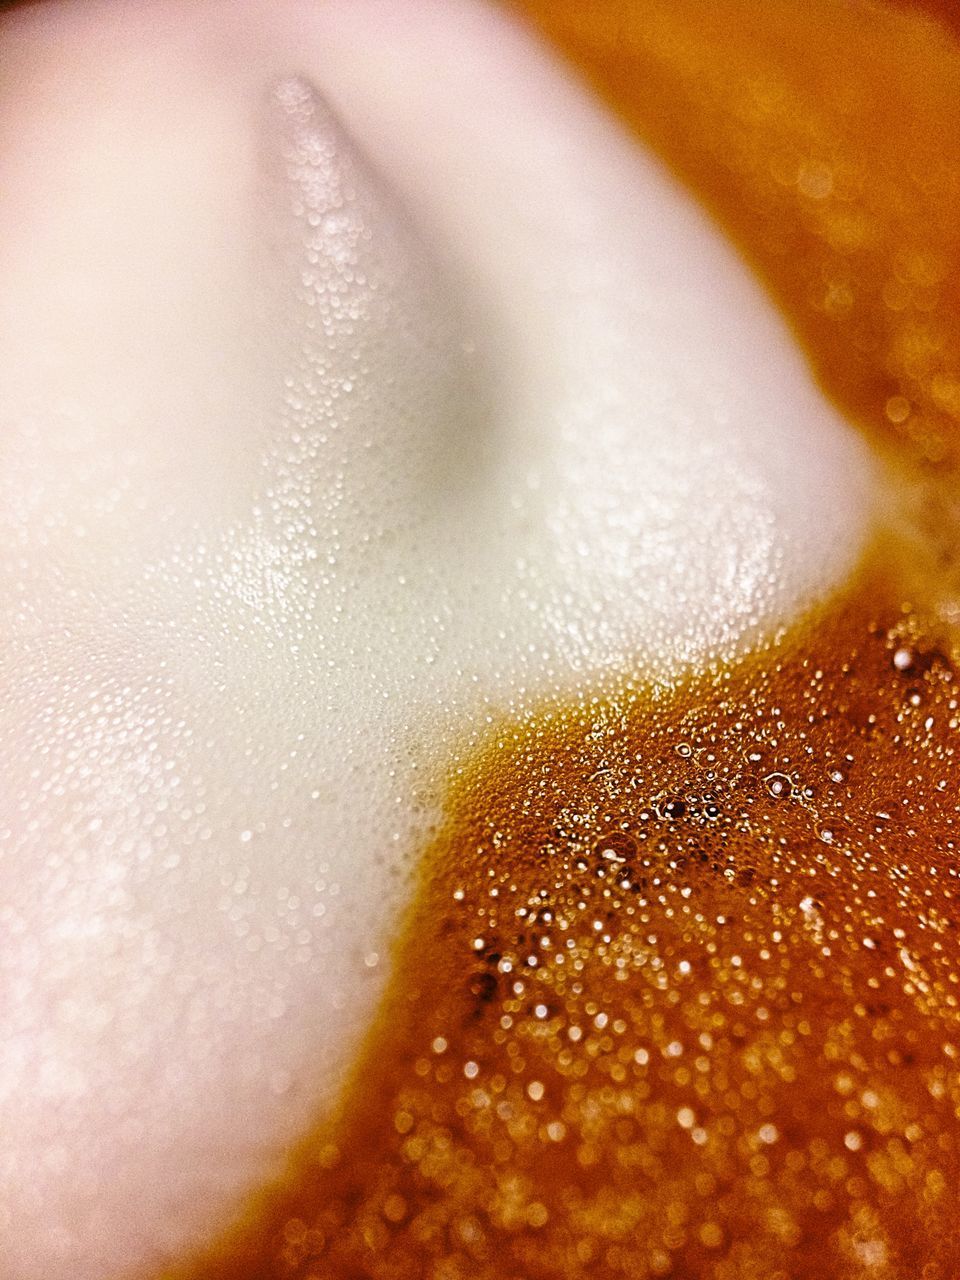 CLOSE-UP OF COFFEE CUP